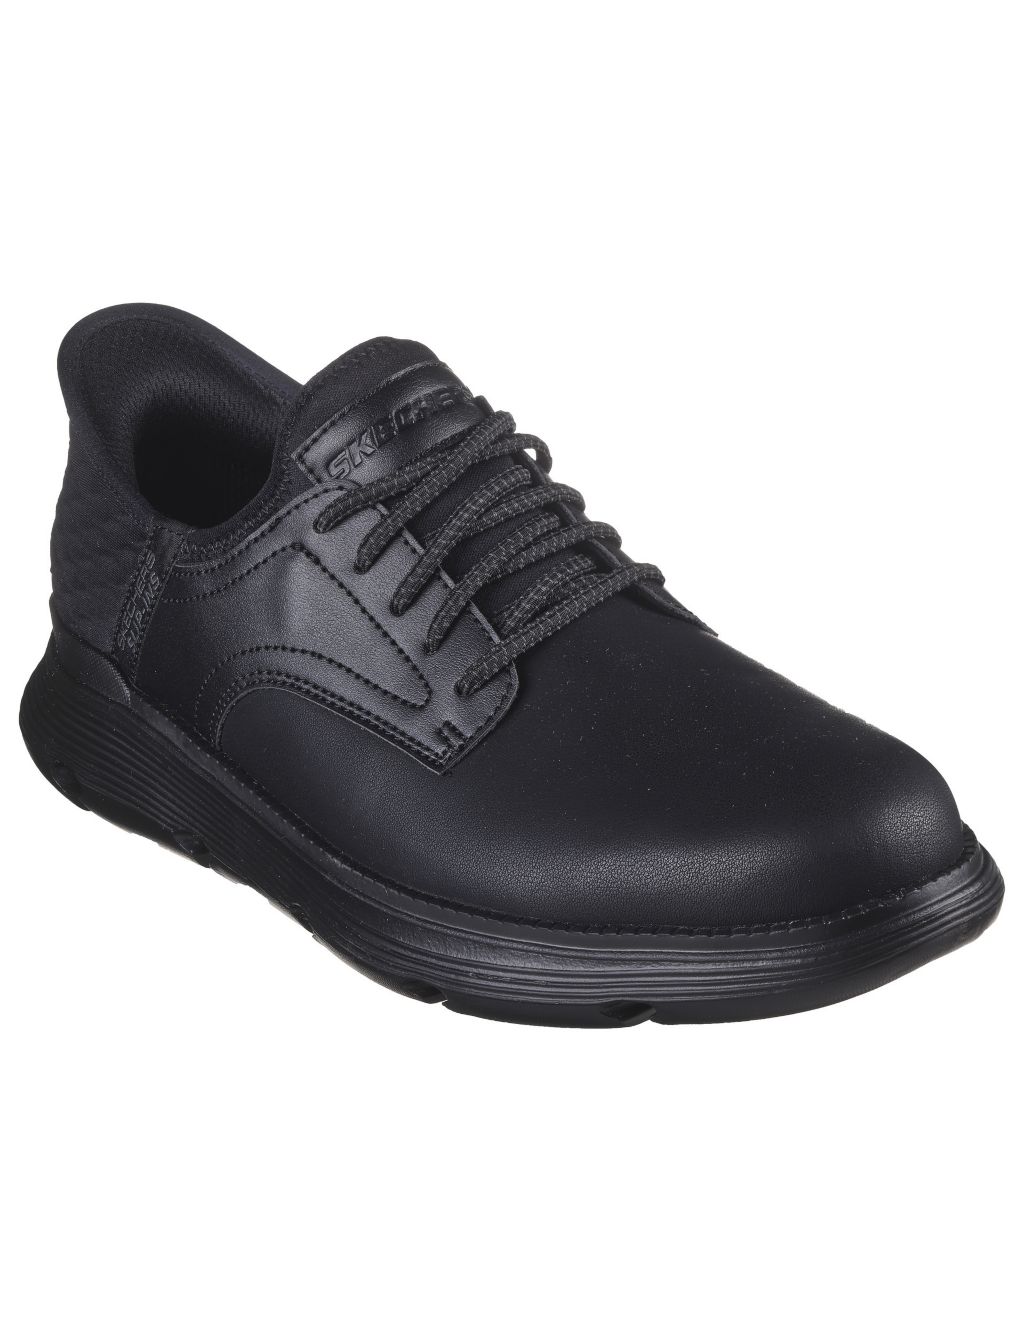 Garza Gervin Leather Slip-ins™ Trainers image 2